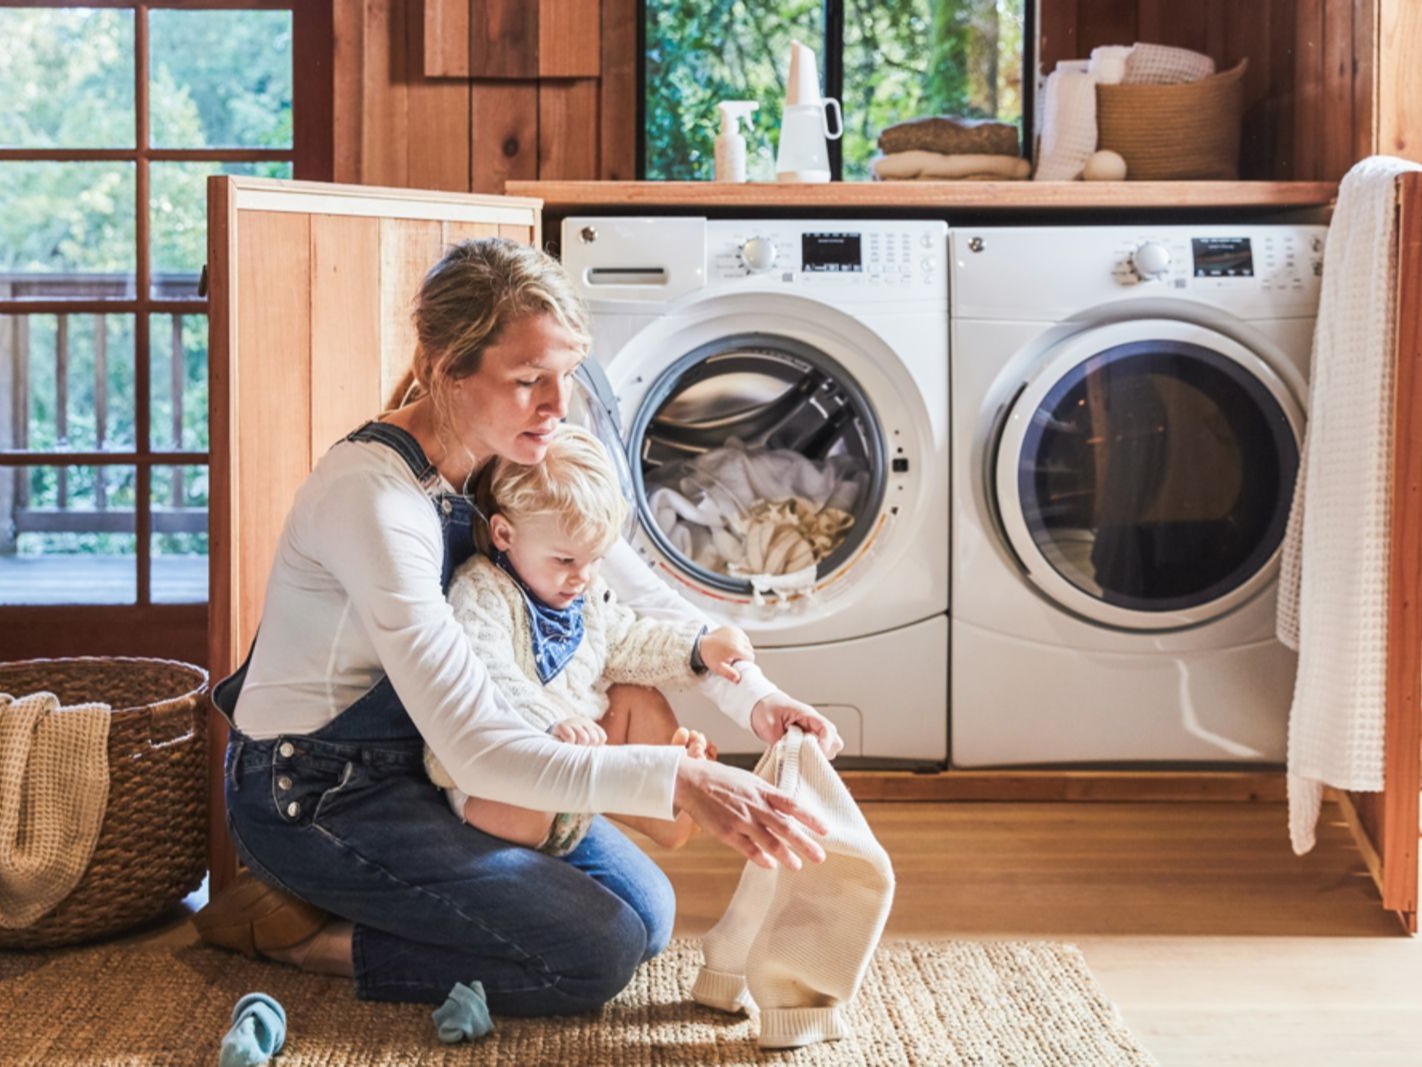 Woman and child in front of washing machine